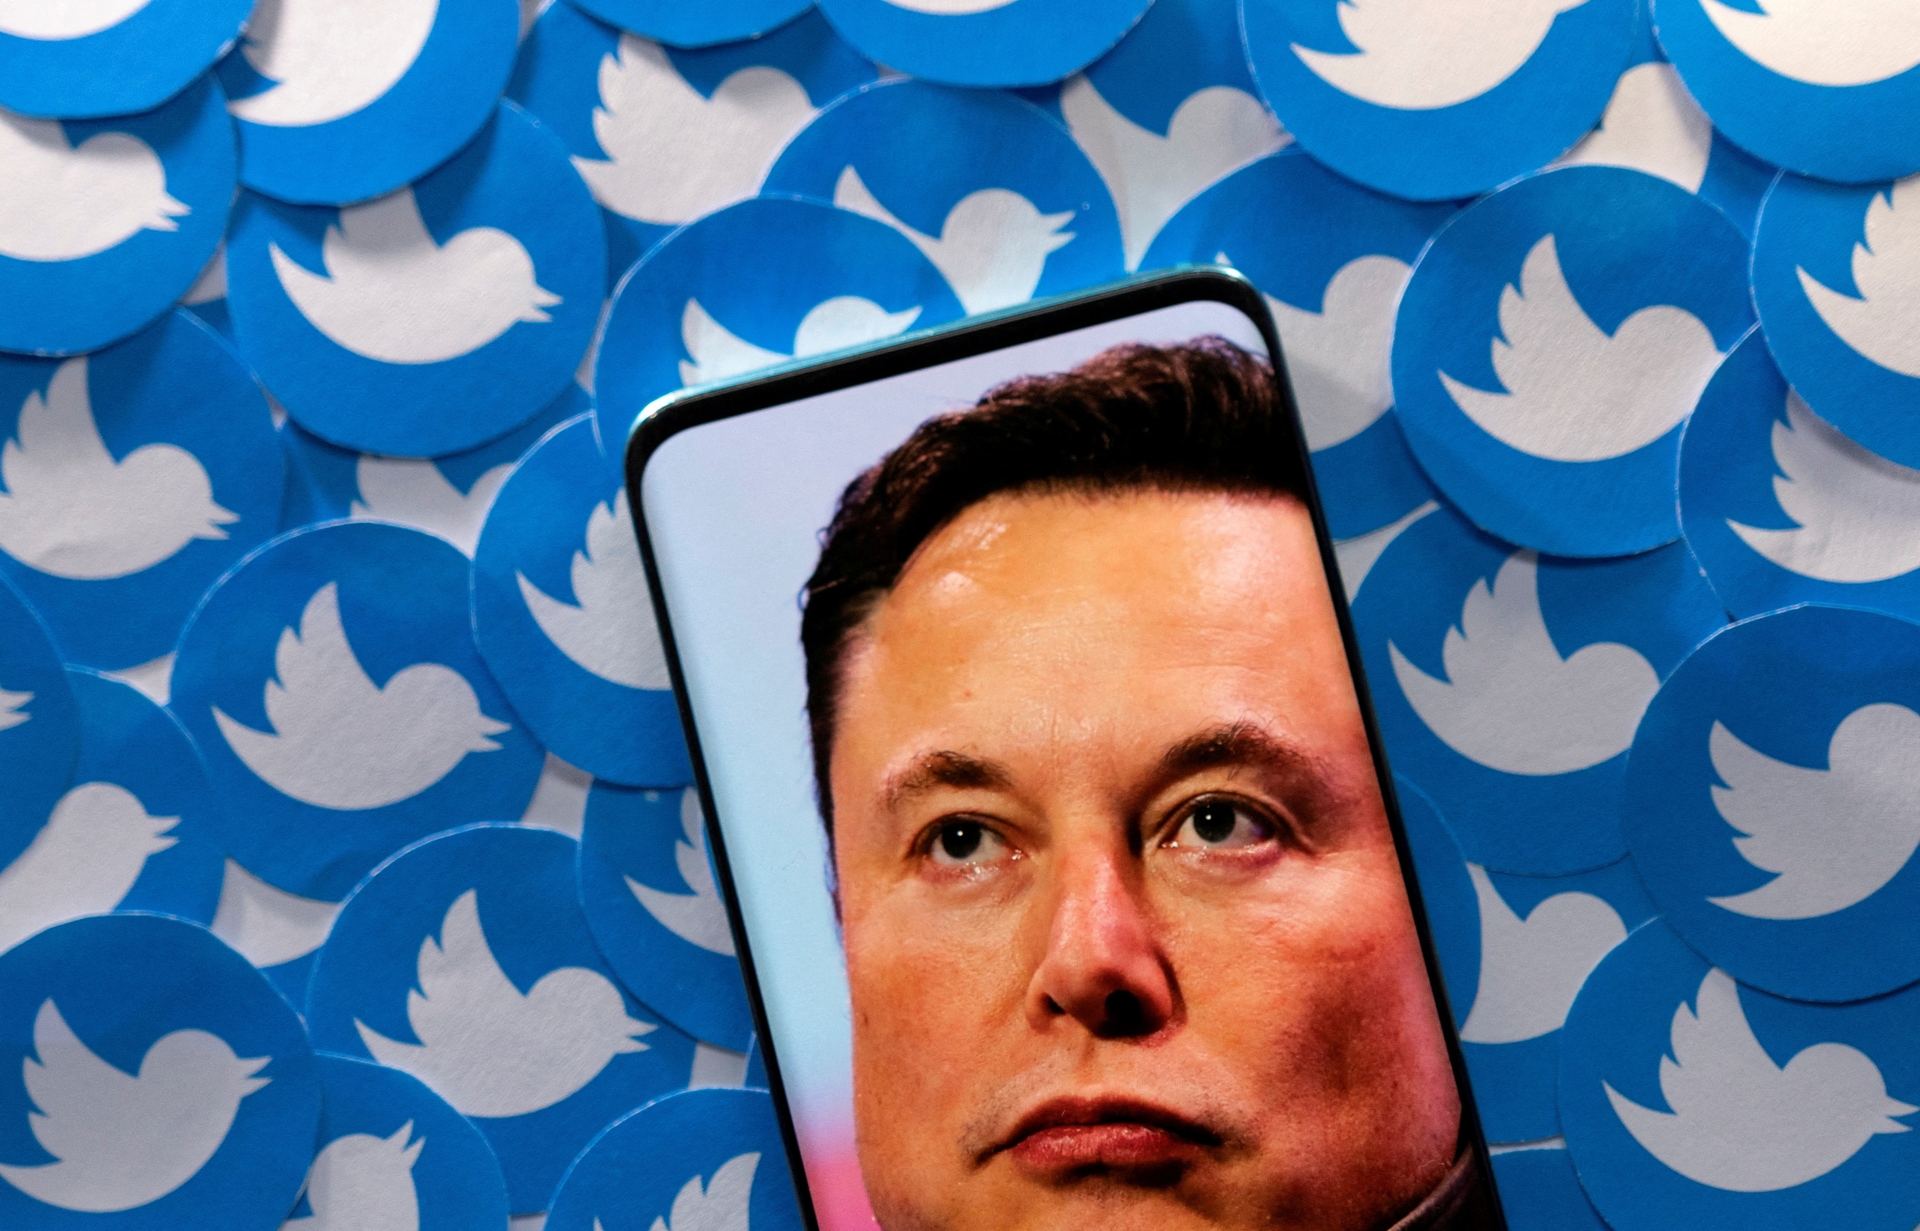 The chaos at the offices of the popular social media hasn't ended as Elon Musk fired more Twitter employees just before Thanksgiving, saying these will be... 